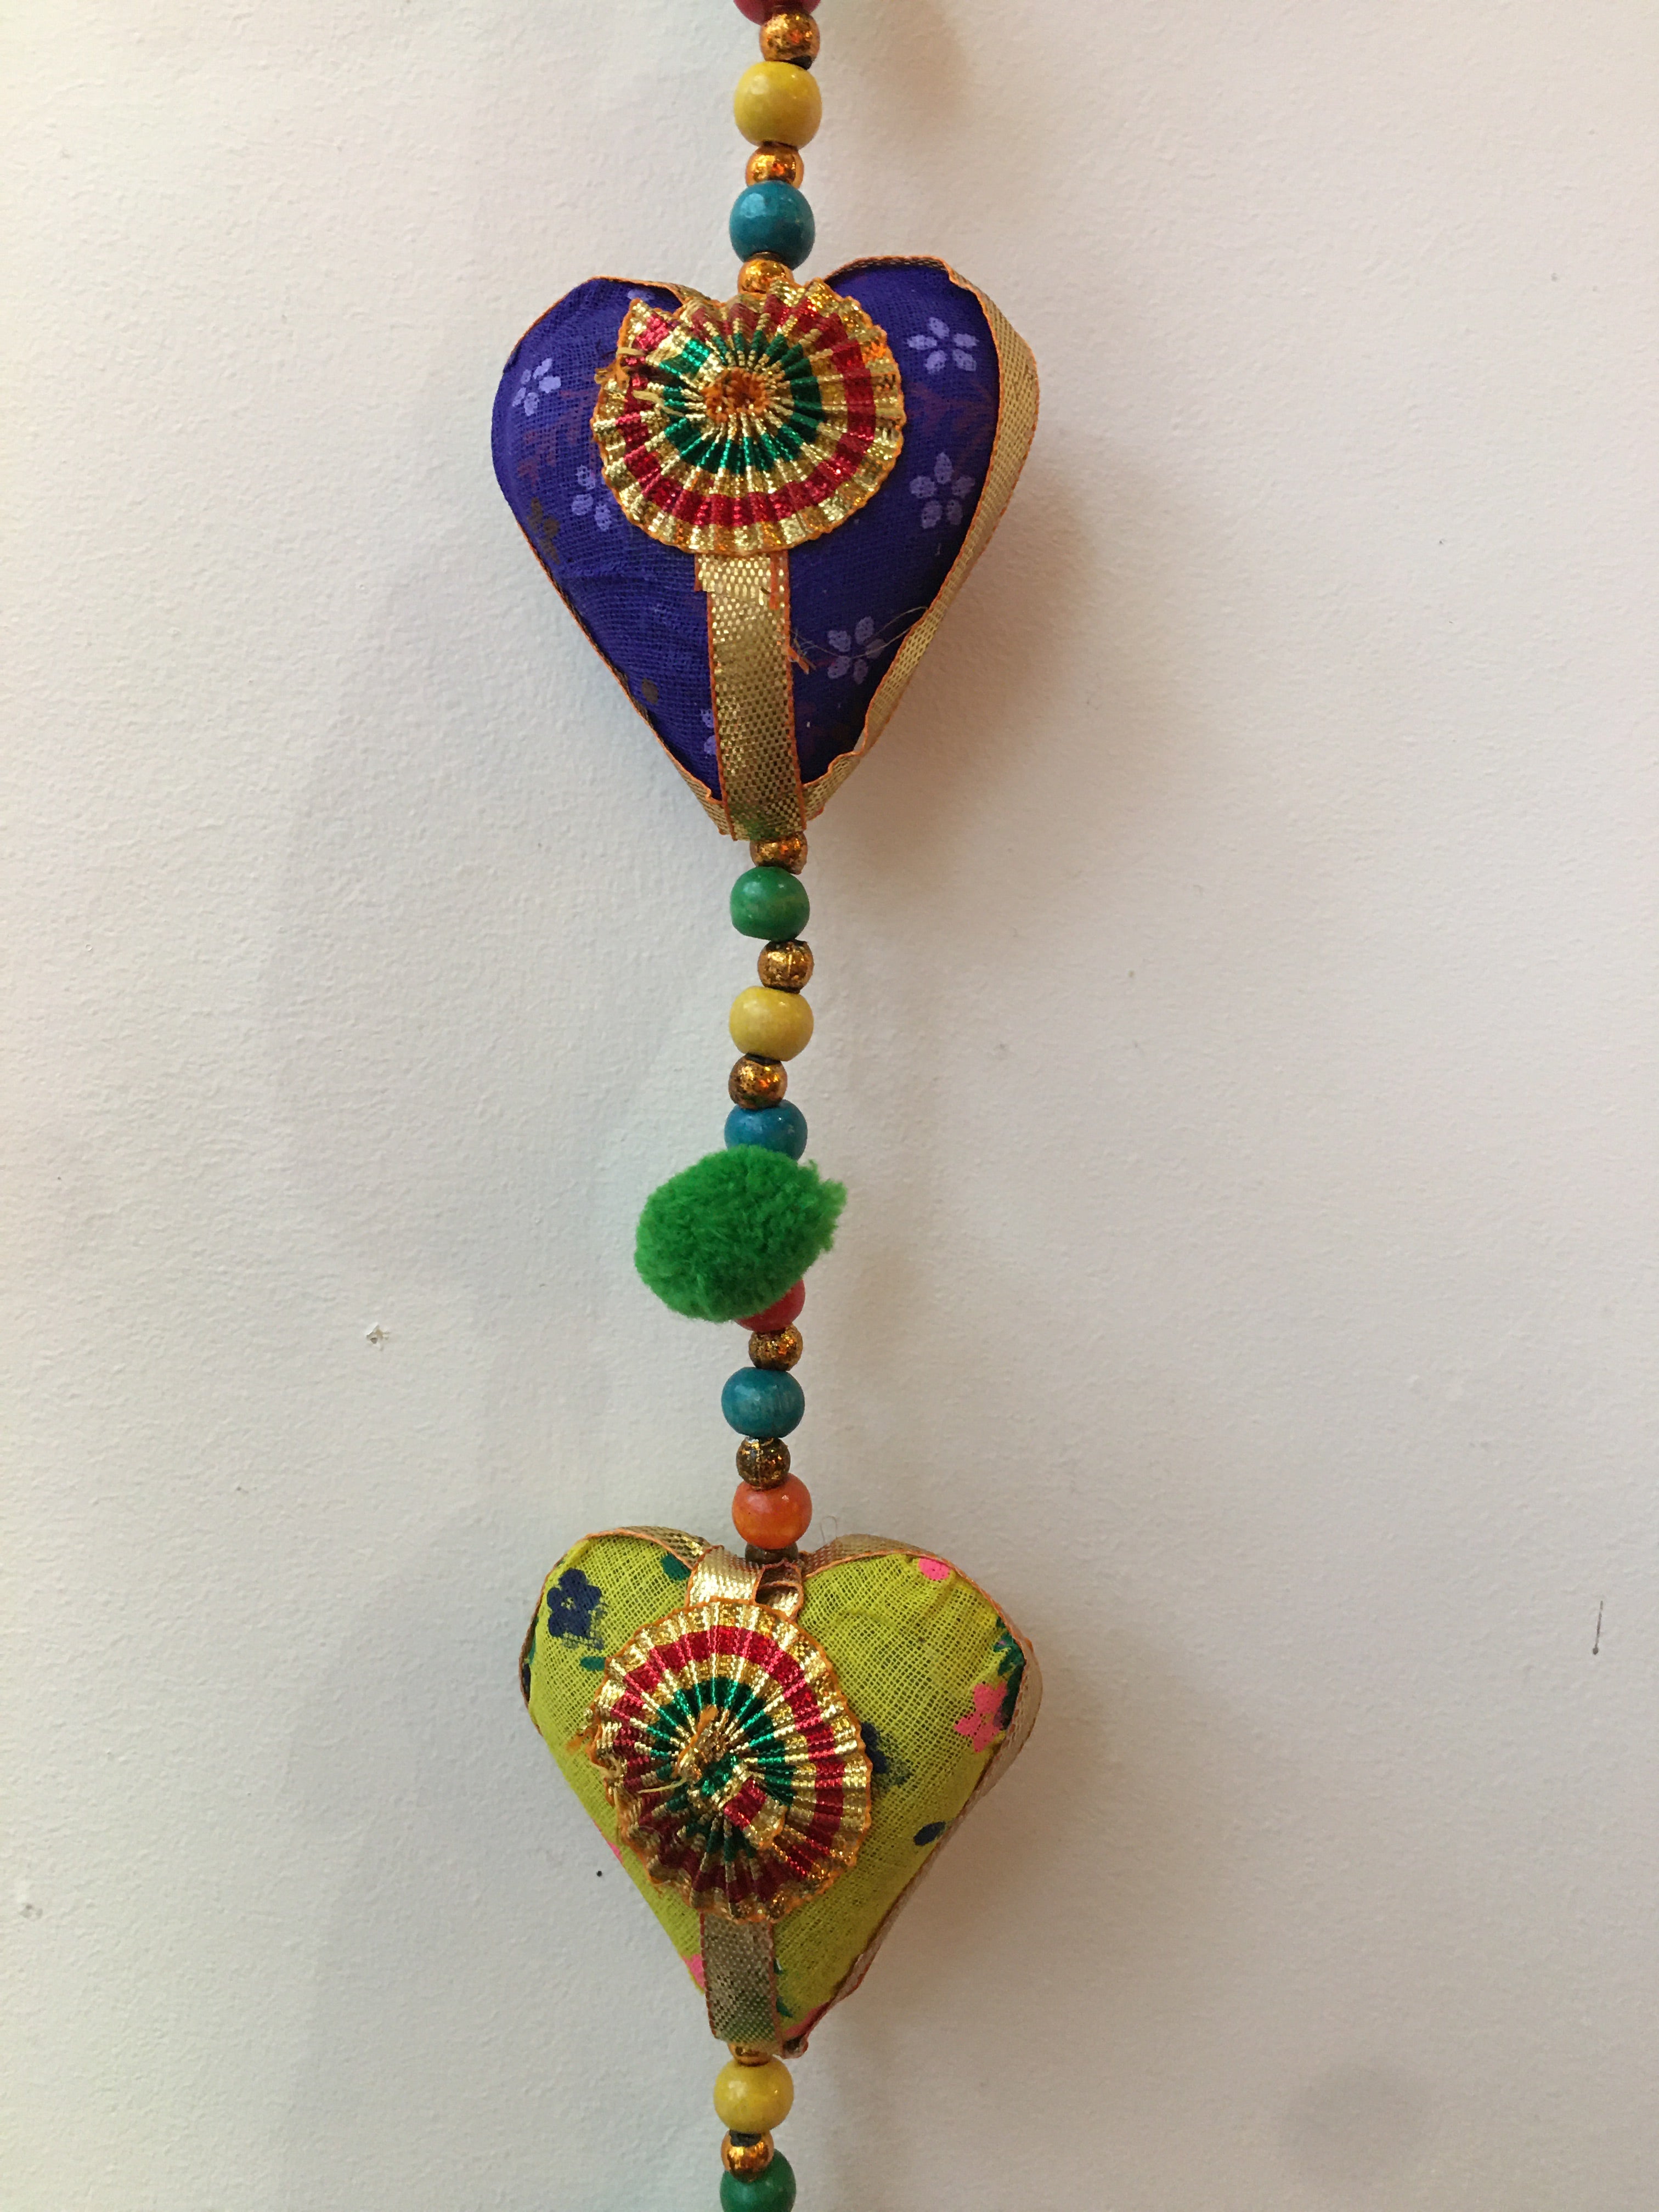 INDIAN HANGING LOVE HEARTS DECORATION